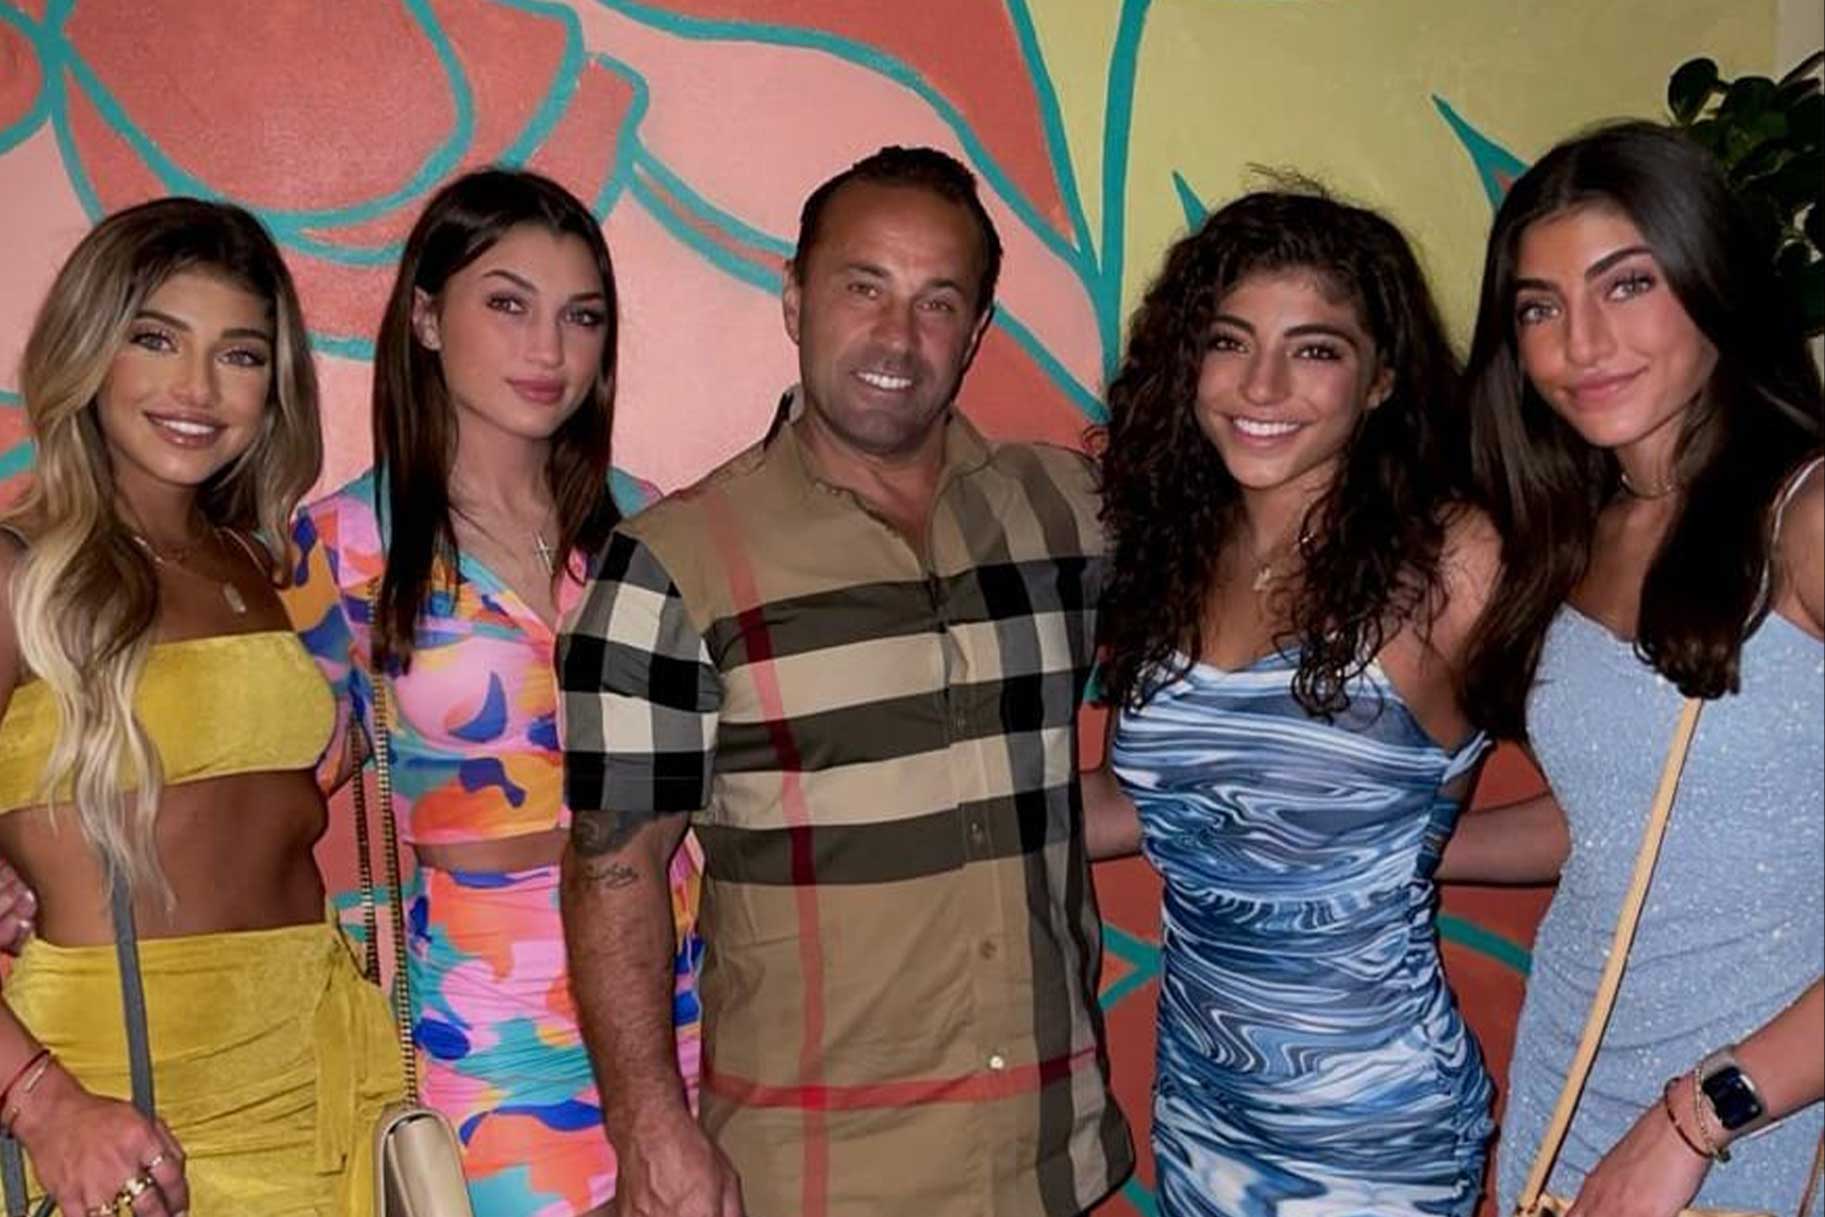 Joe Giudice and daughters in the Bahamas together.